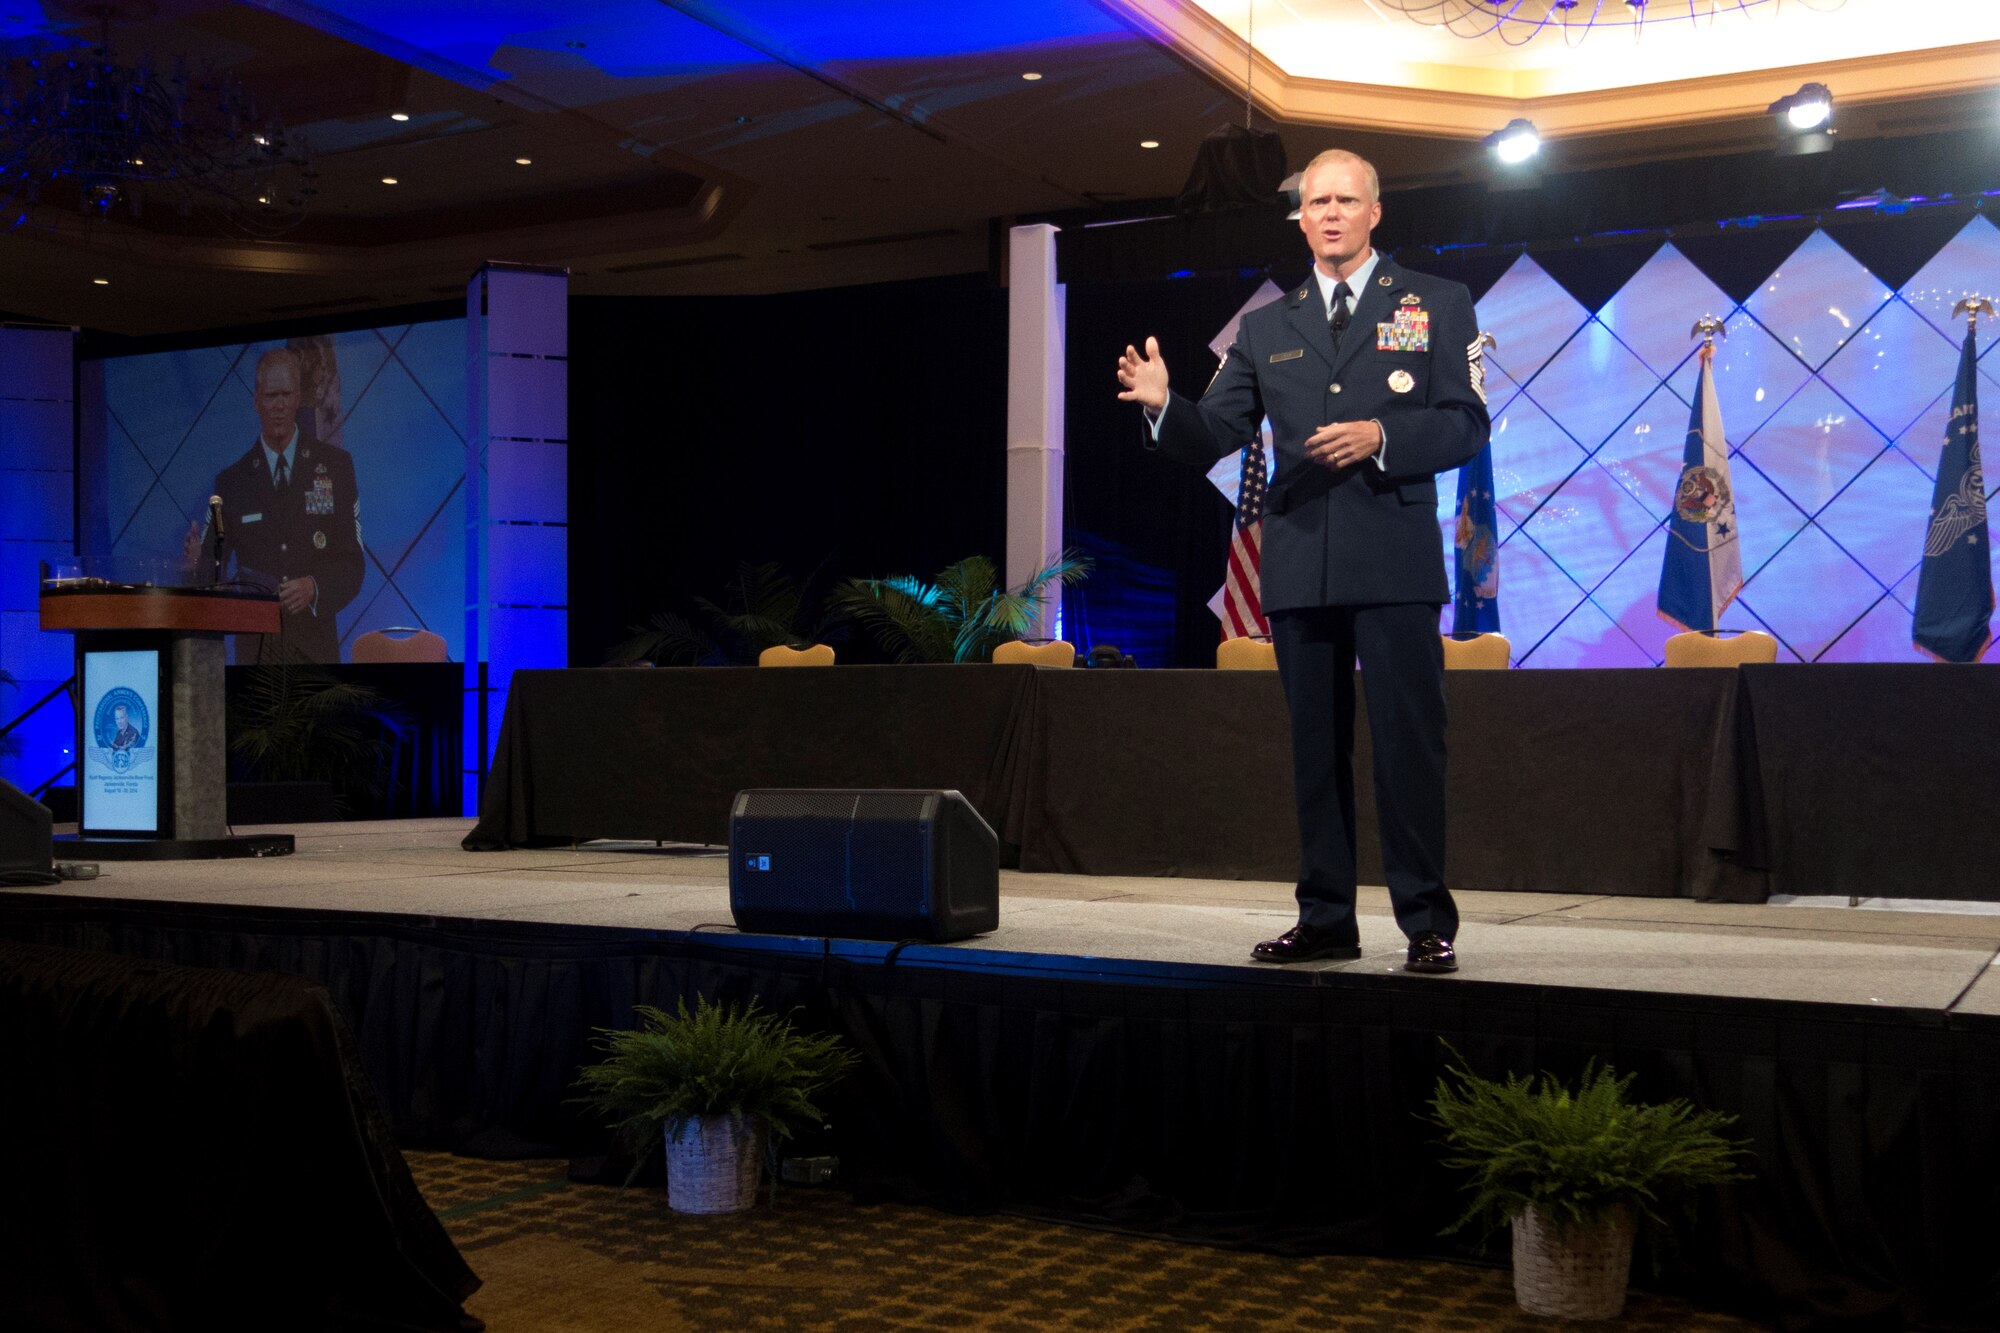 Chief Master Sgt. of the Air Force James A. Cody speaks to an audience of current, former and retired Airmen at the Air Force Sergeants Association Professional Airmen's Conference in Jacksonville, Fla. (U.S. Air Force photo/Senior Master Sgt. Lee Hoover)